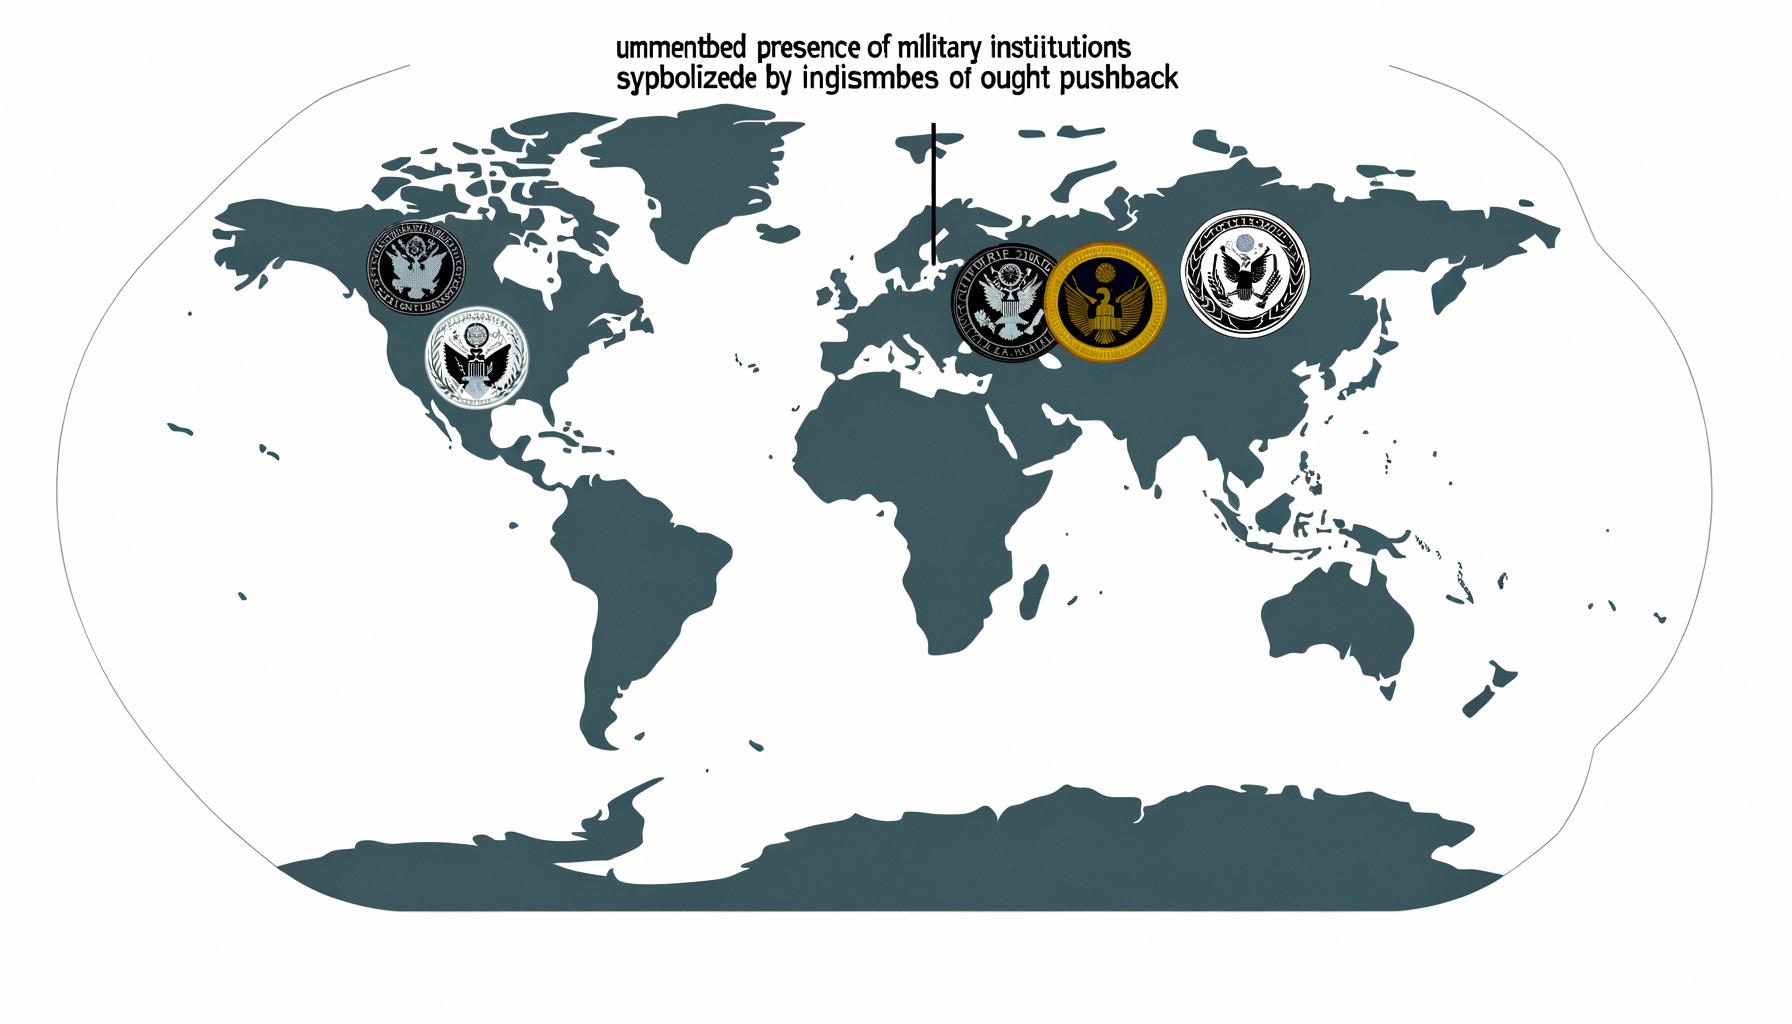 US military bases face local opposition and strategic challenges globally.